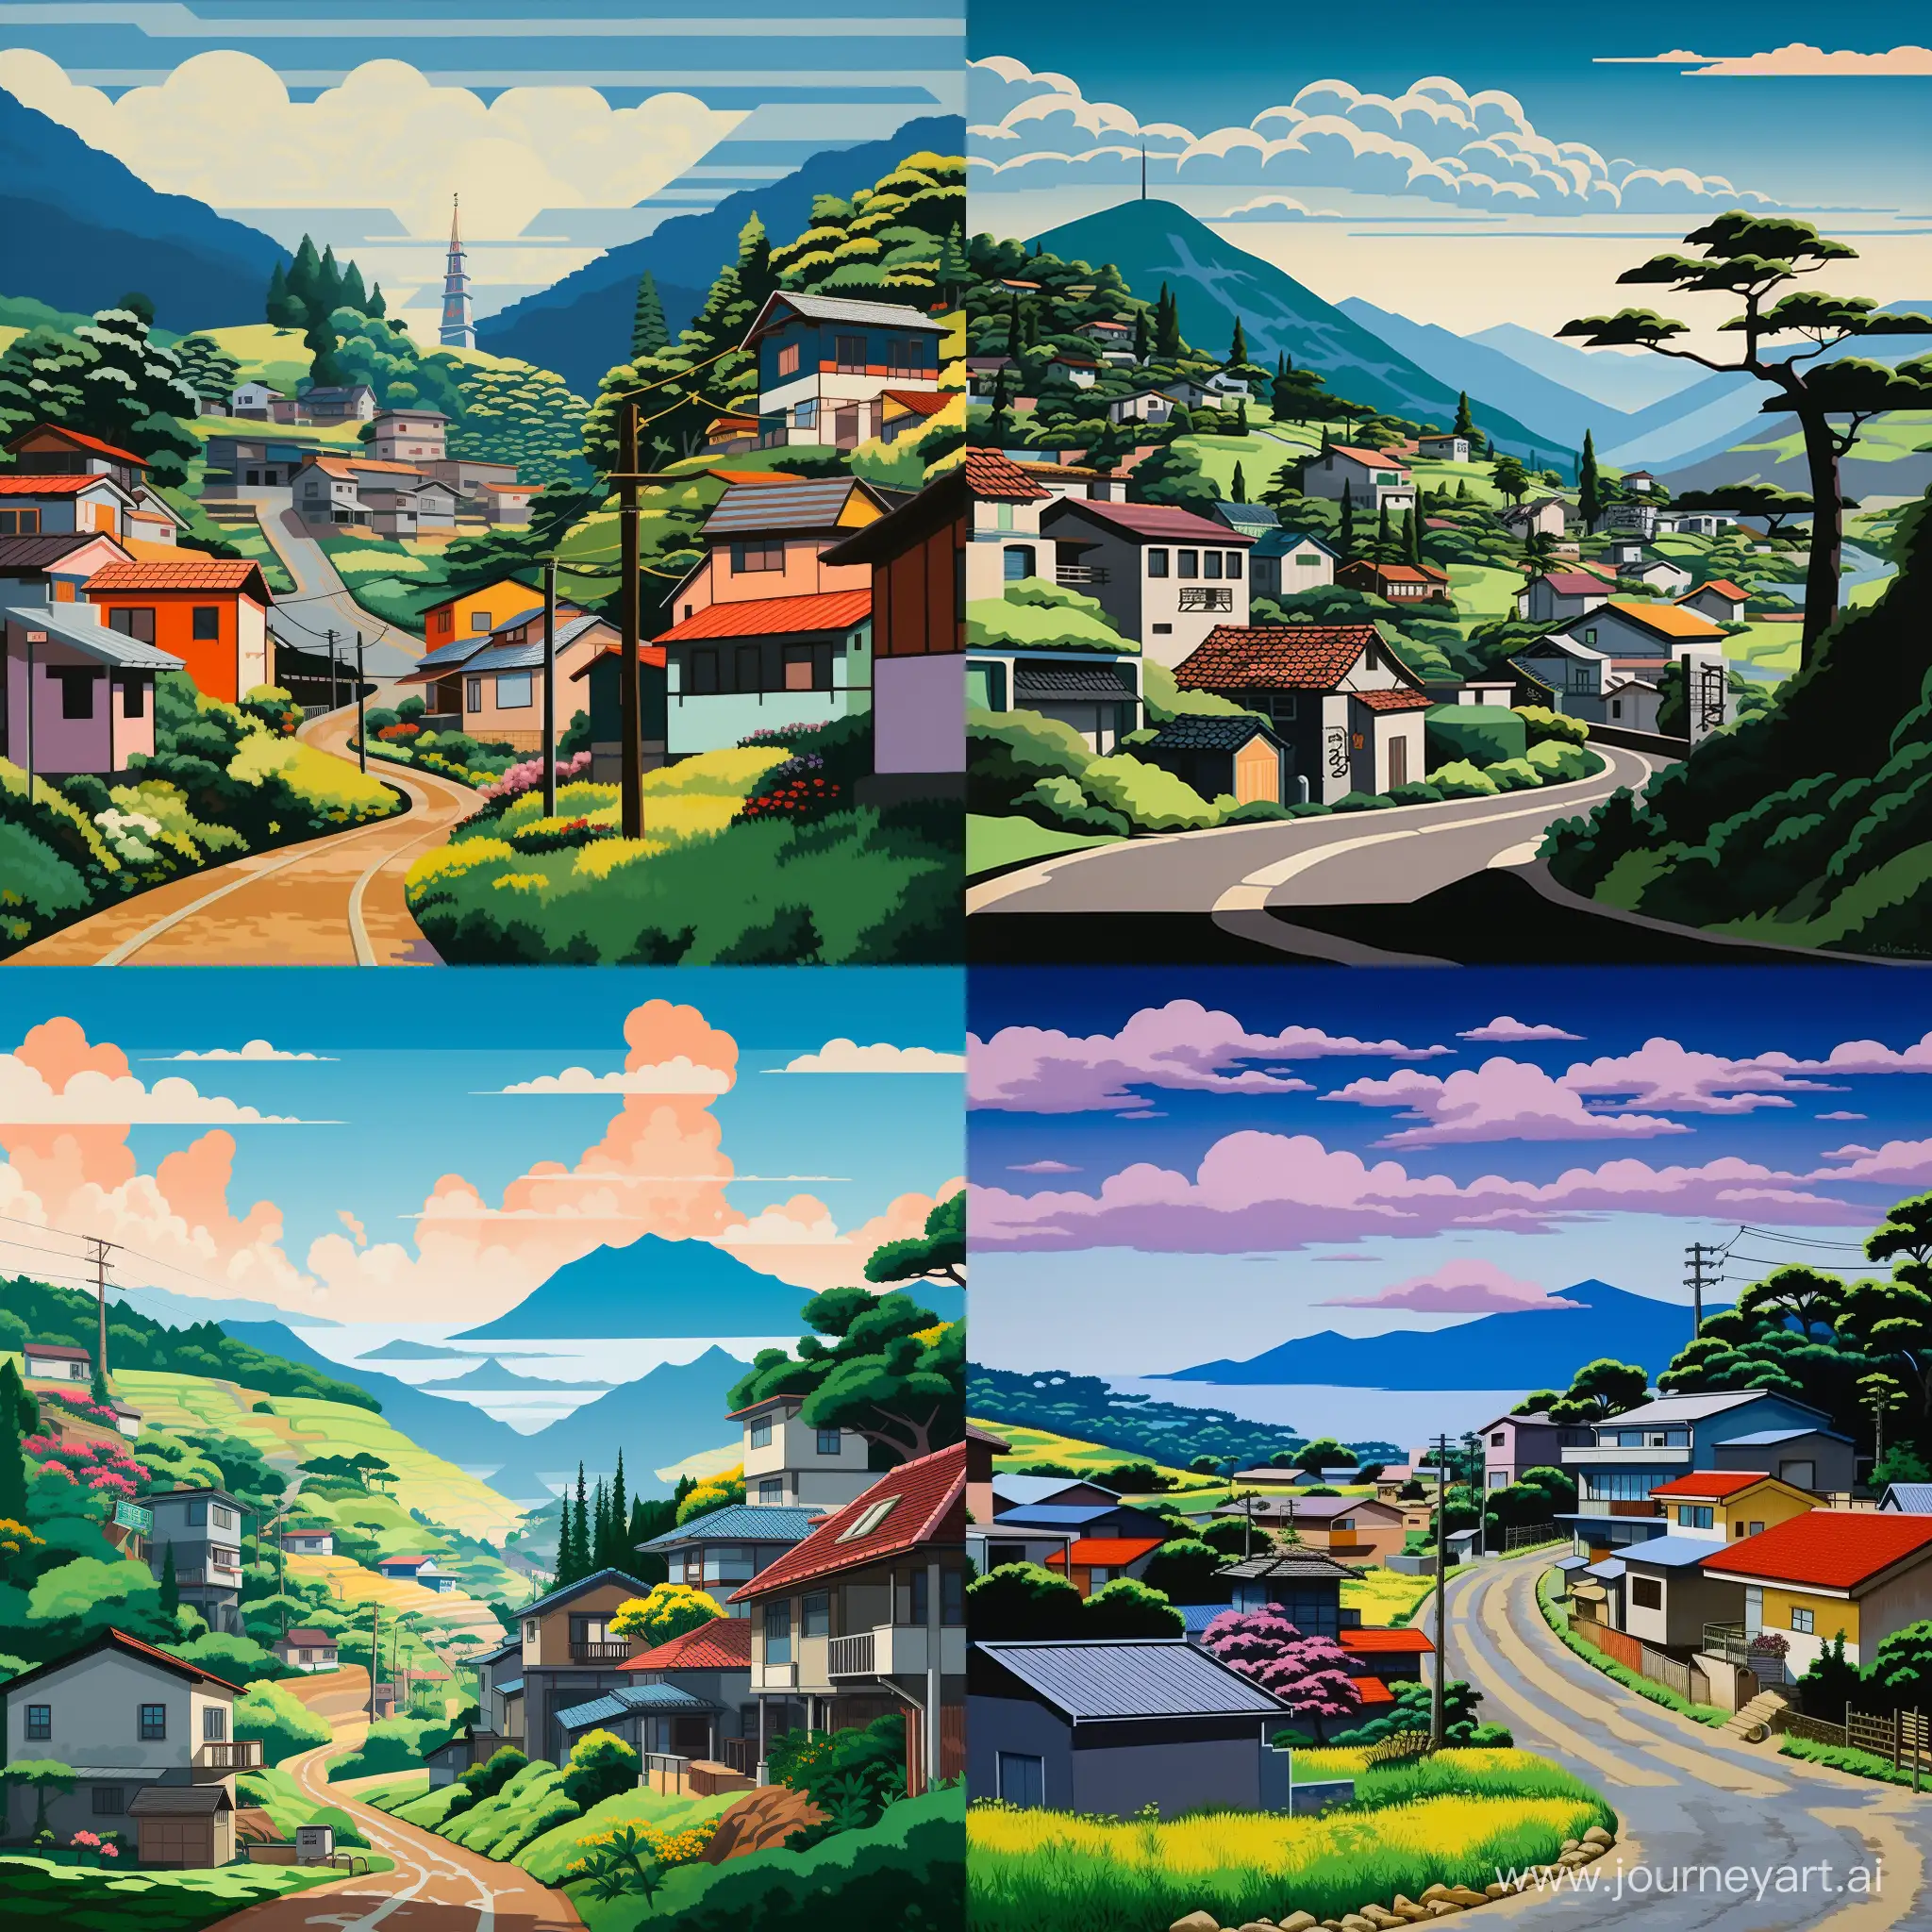 A picture of a village in Japan inspired by Hiroshi Nagai and the City Pop Art Style